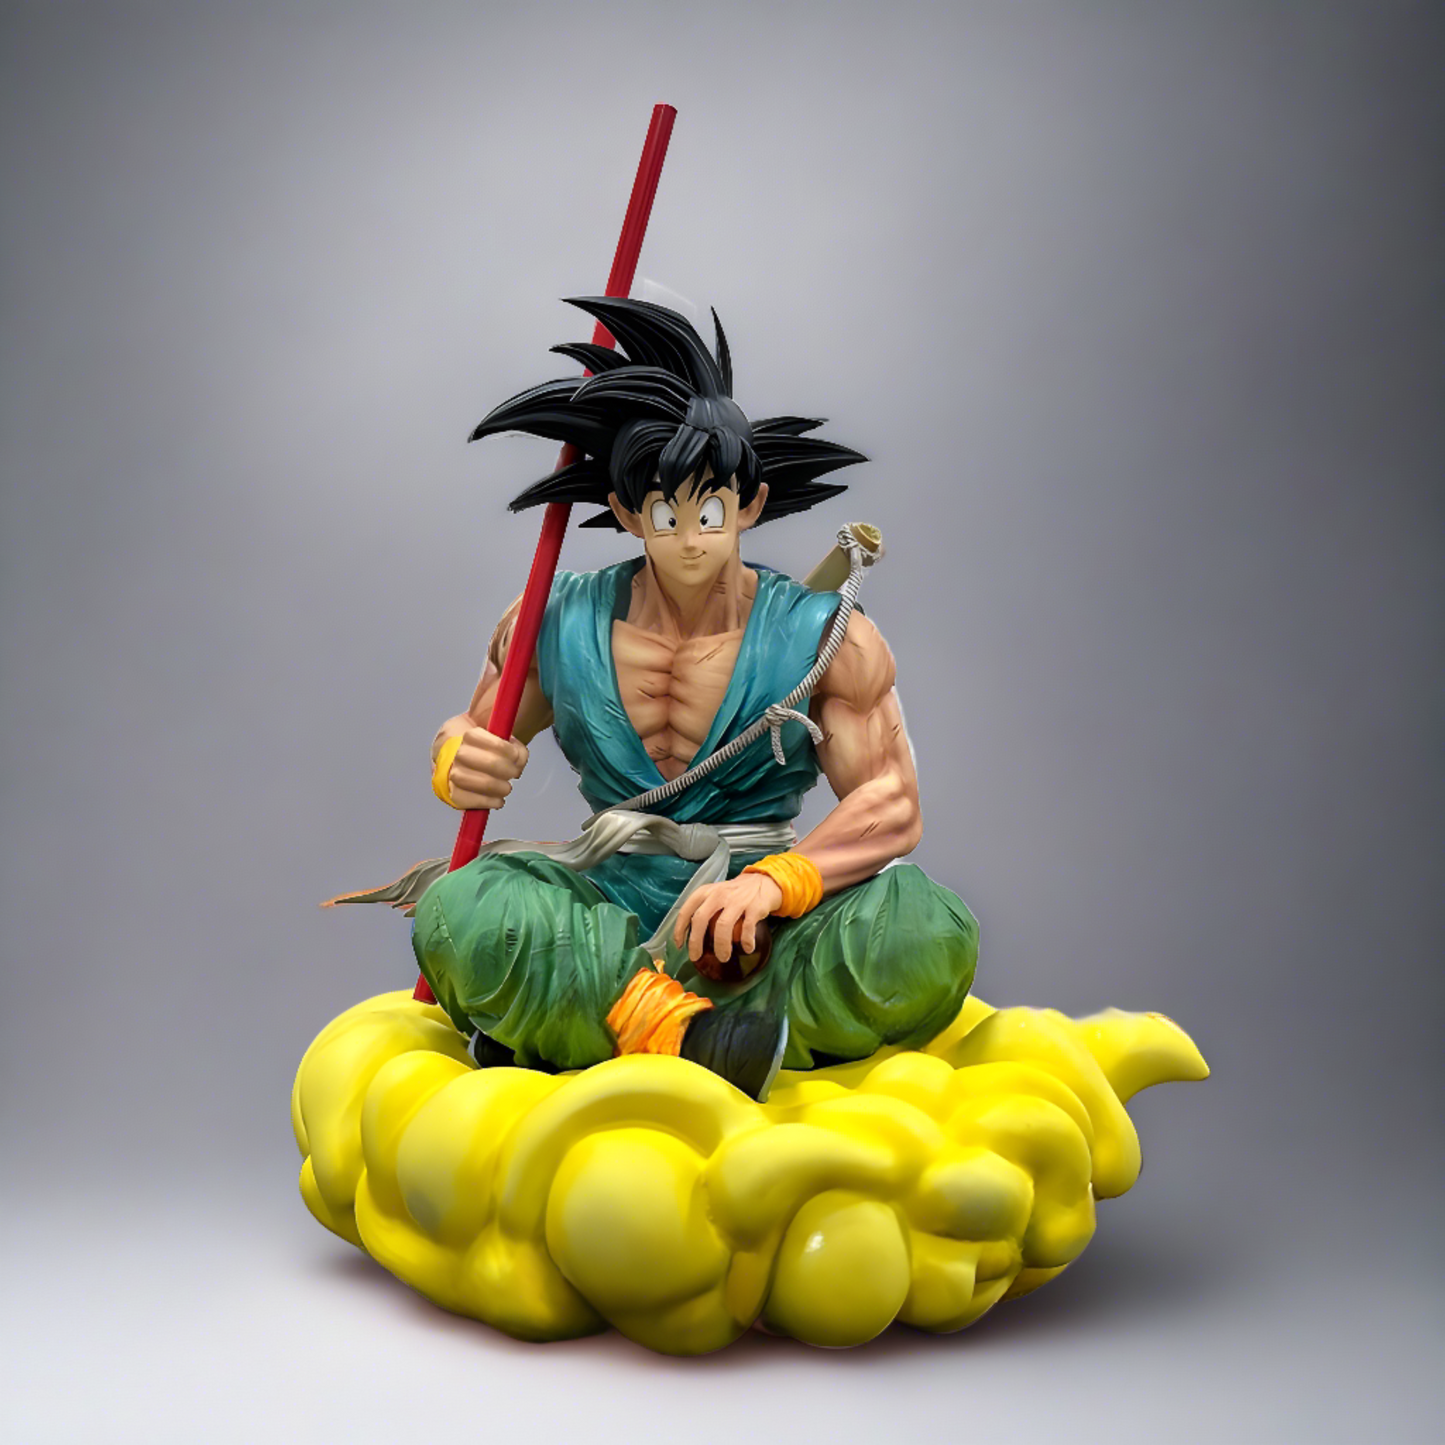 Side view of a Goku figure from Dragon Ball, displaying his iconic teal gi and Power Pole, as he rides the nimbus cloud with determination.